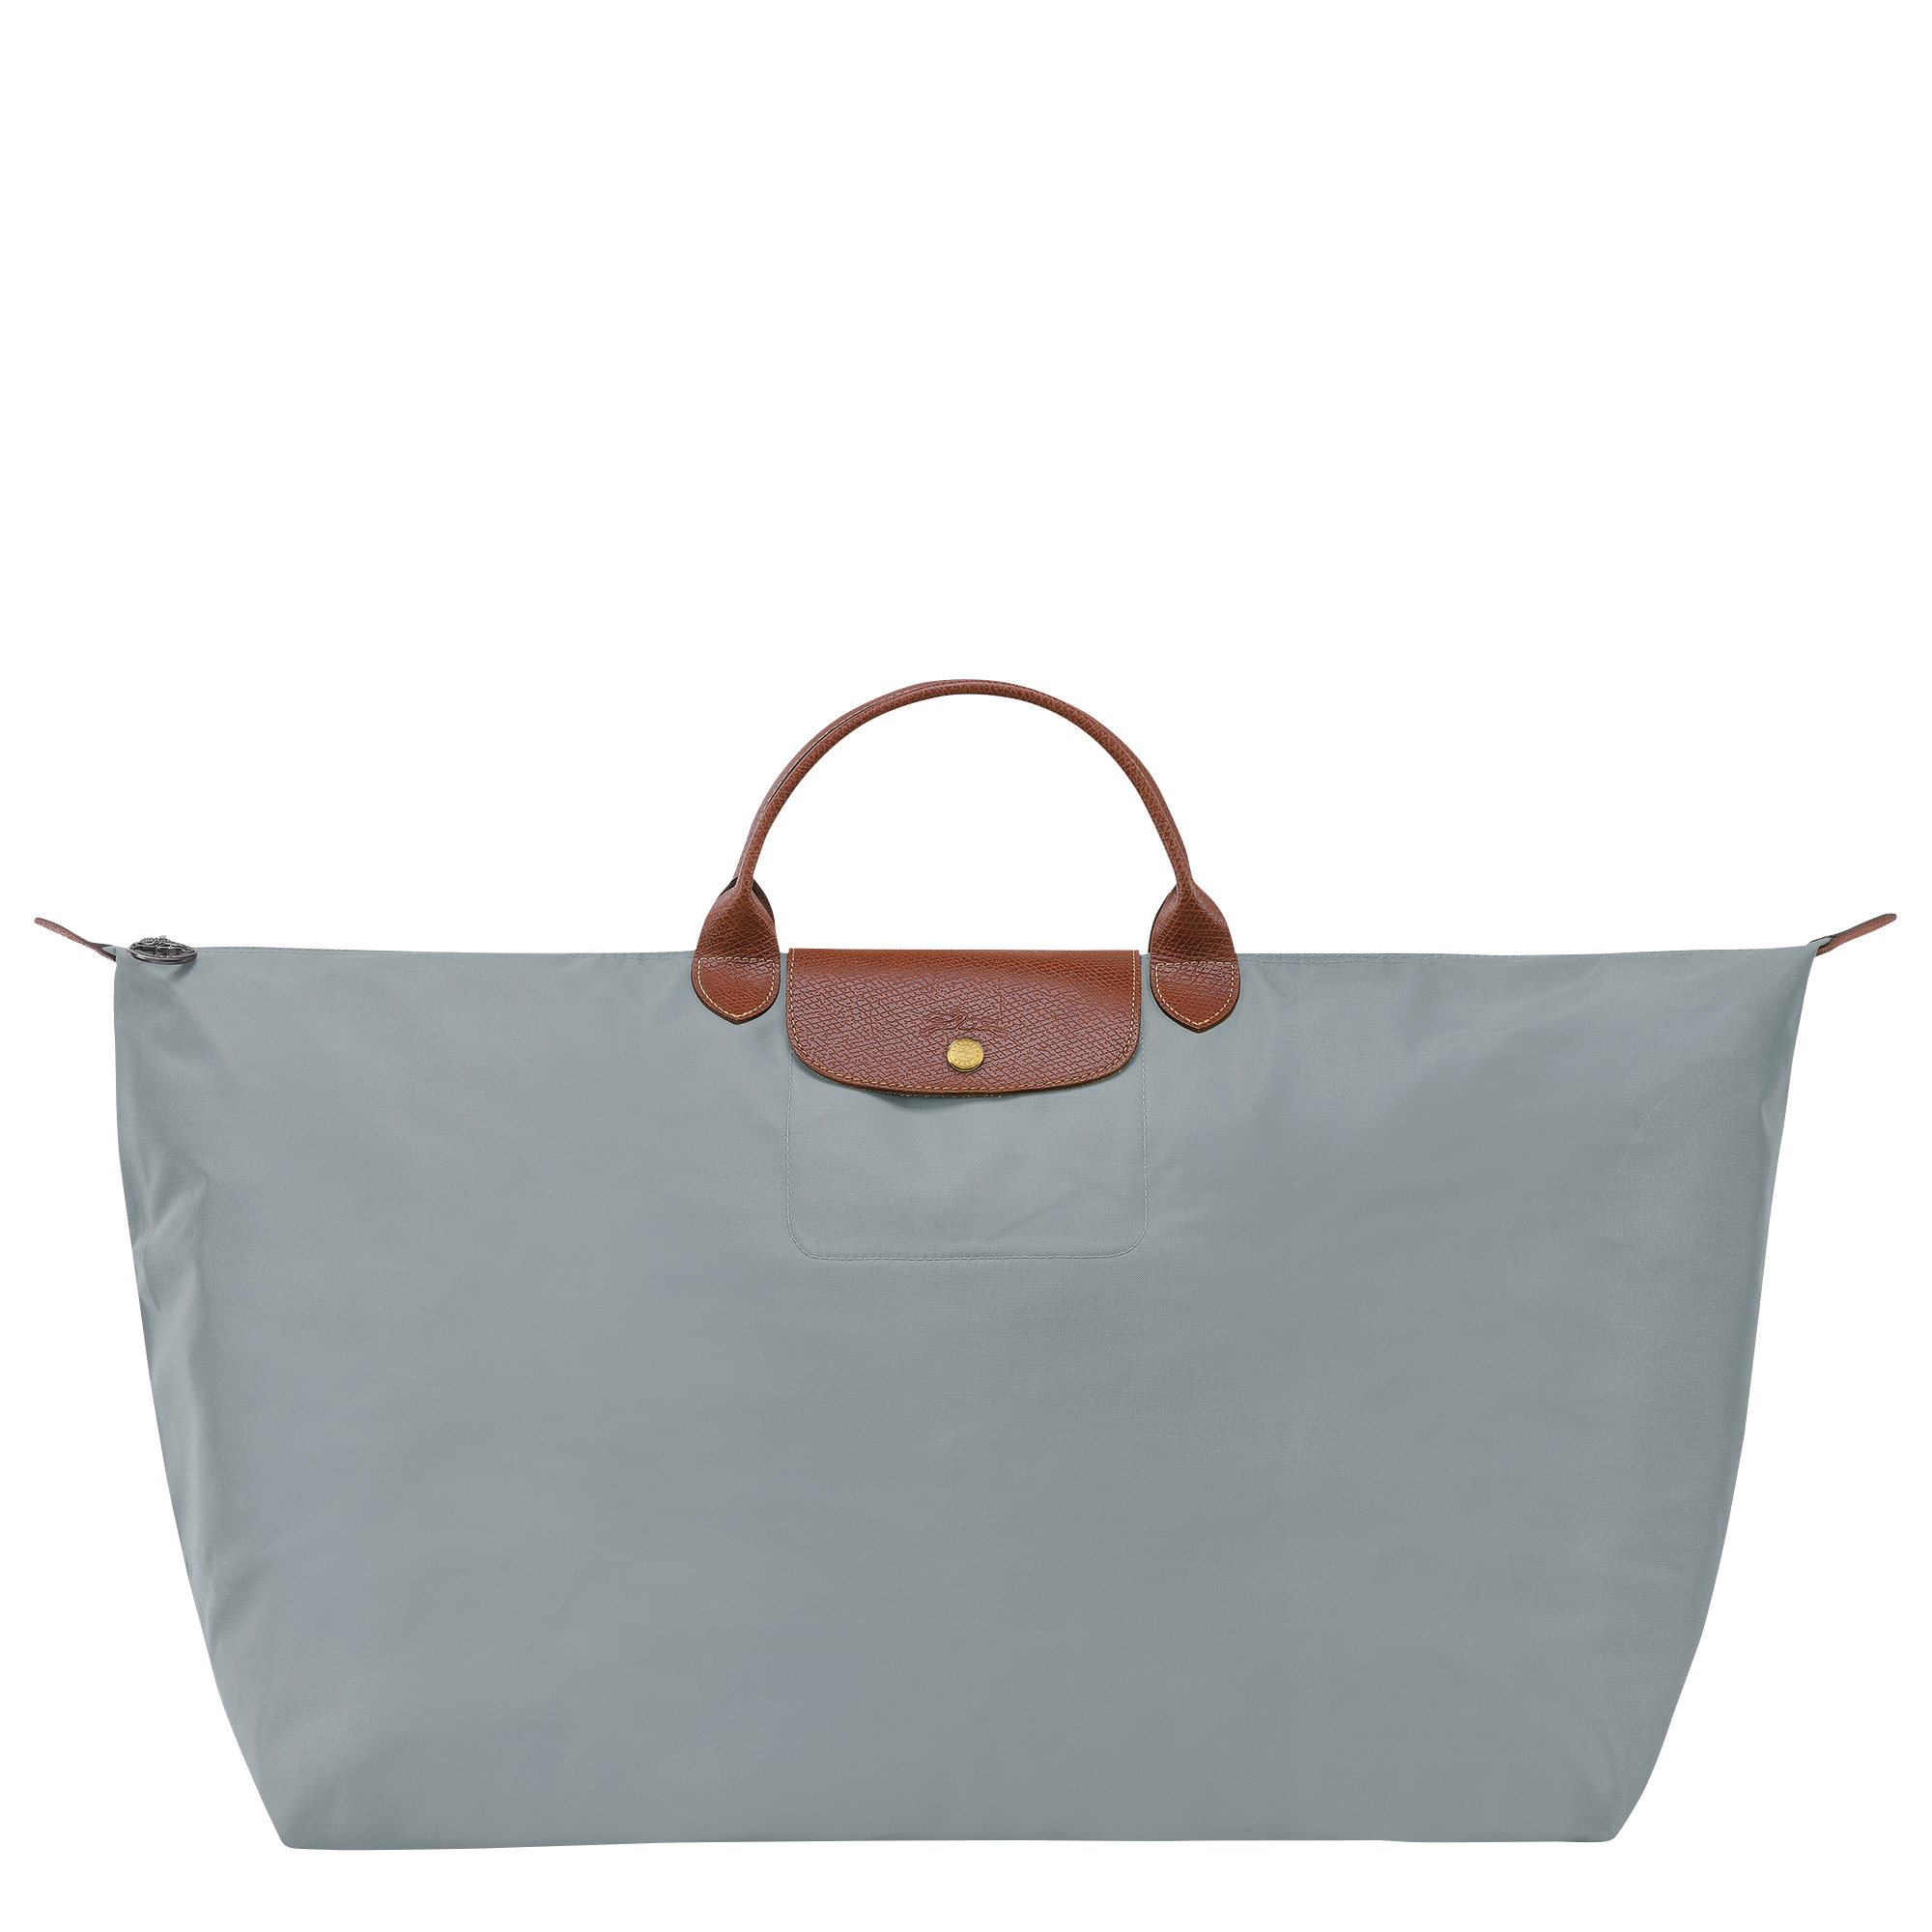 Le Pliage Original M Travel bag Steel - Recycled canvas - 1